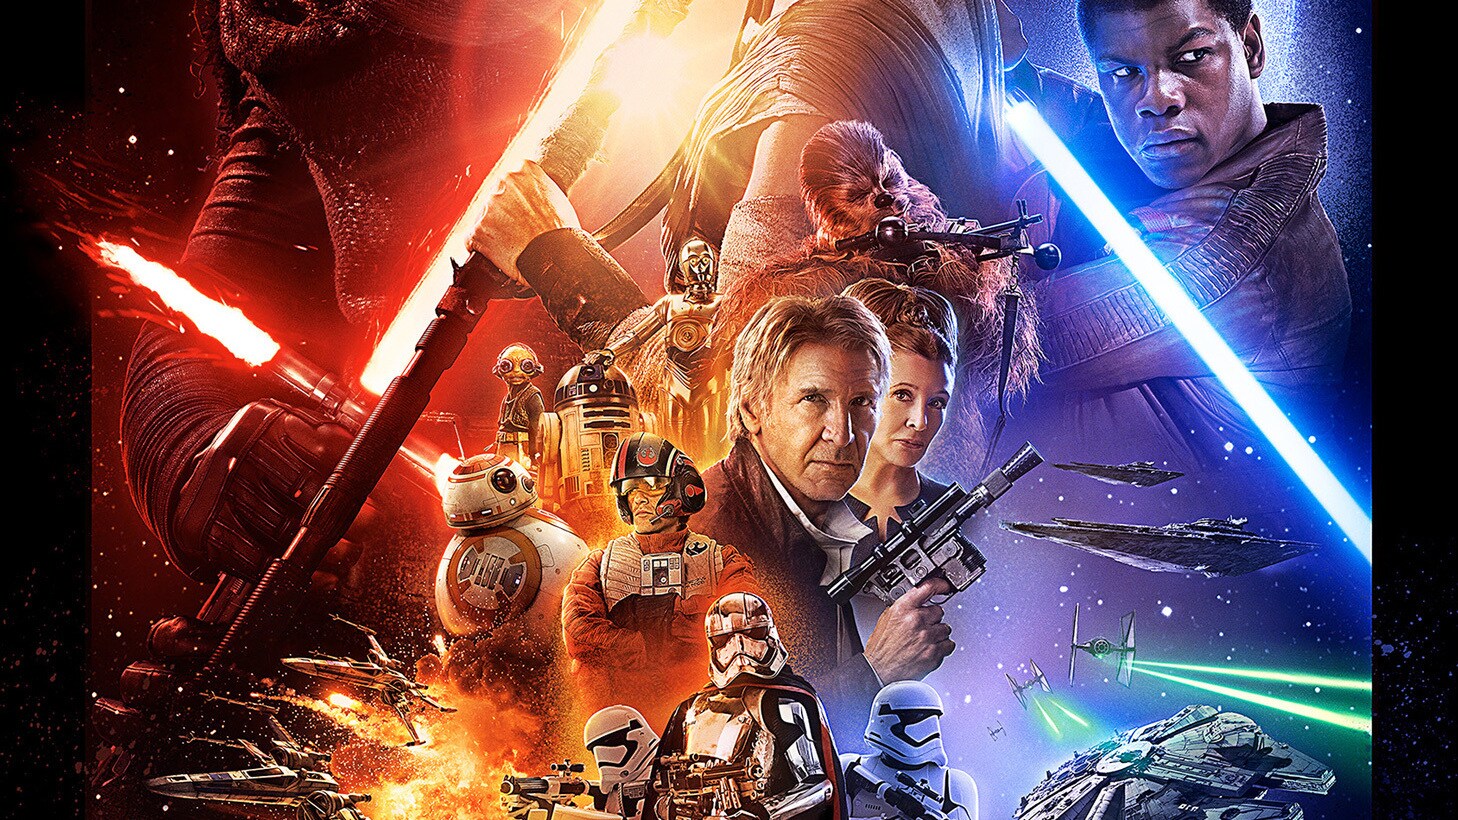 Thank You: Star Wars: The Force Awakens Becomes the #1 Film of All-Time in the US